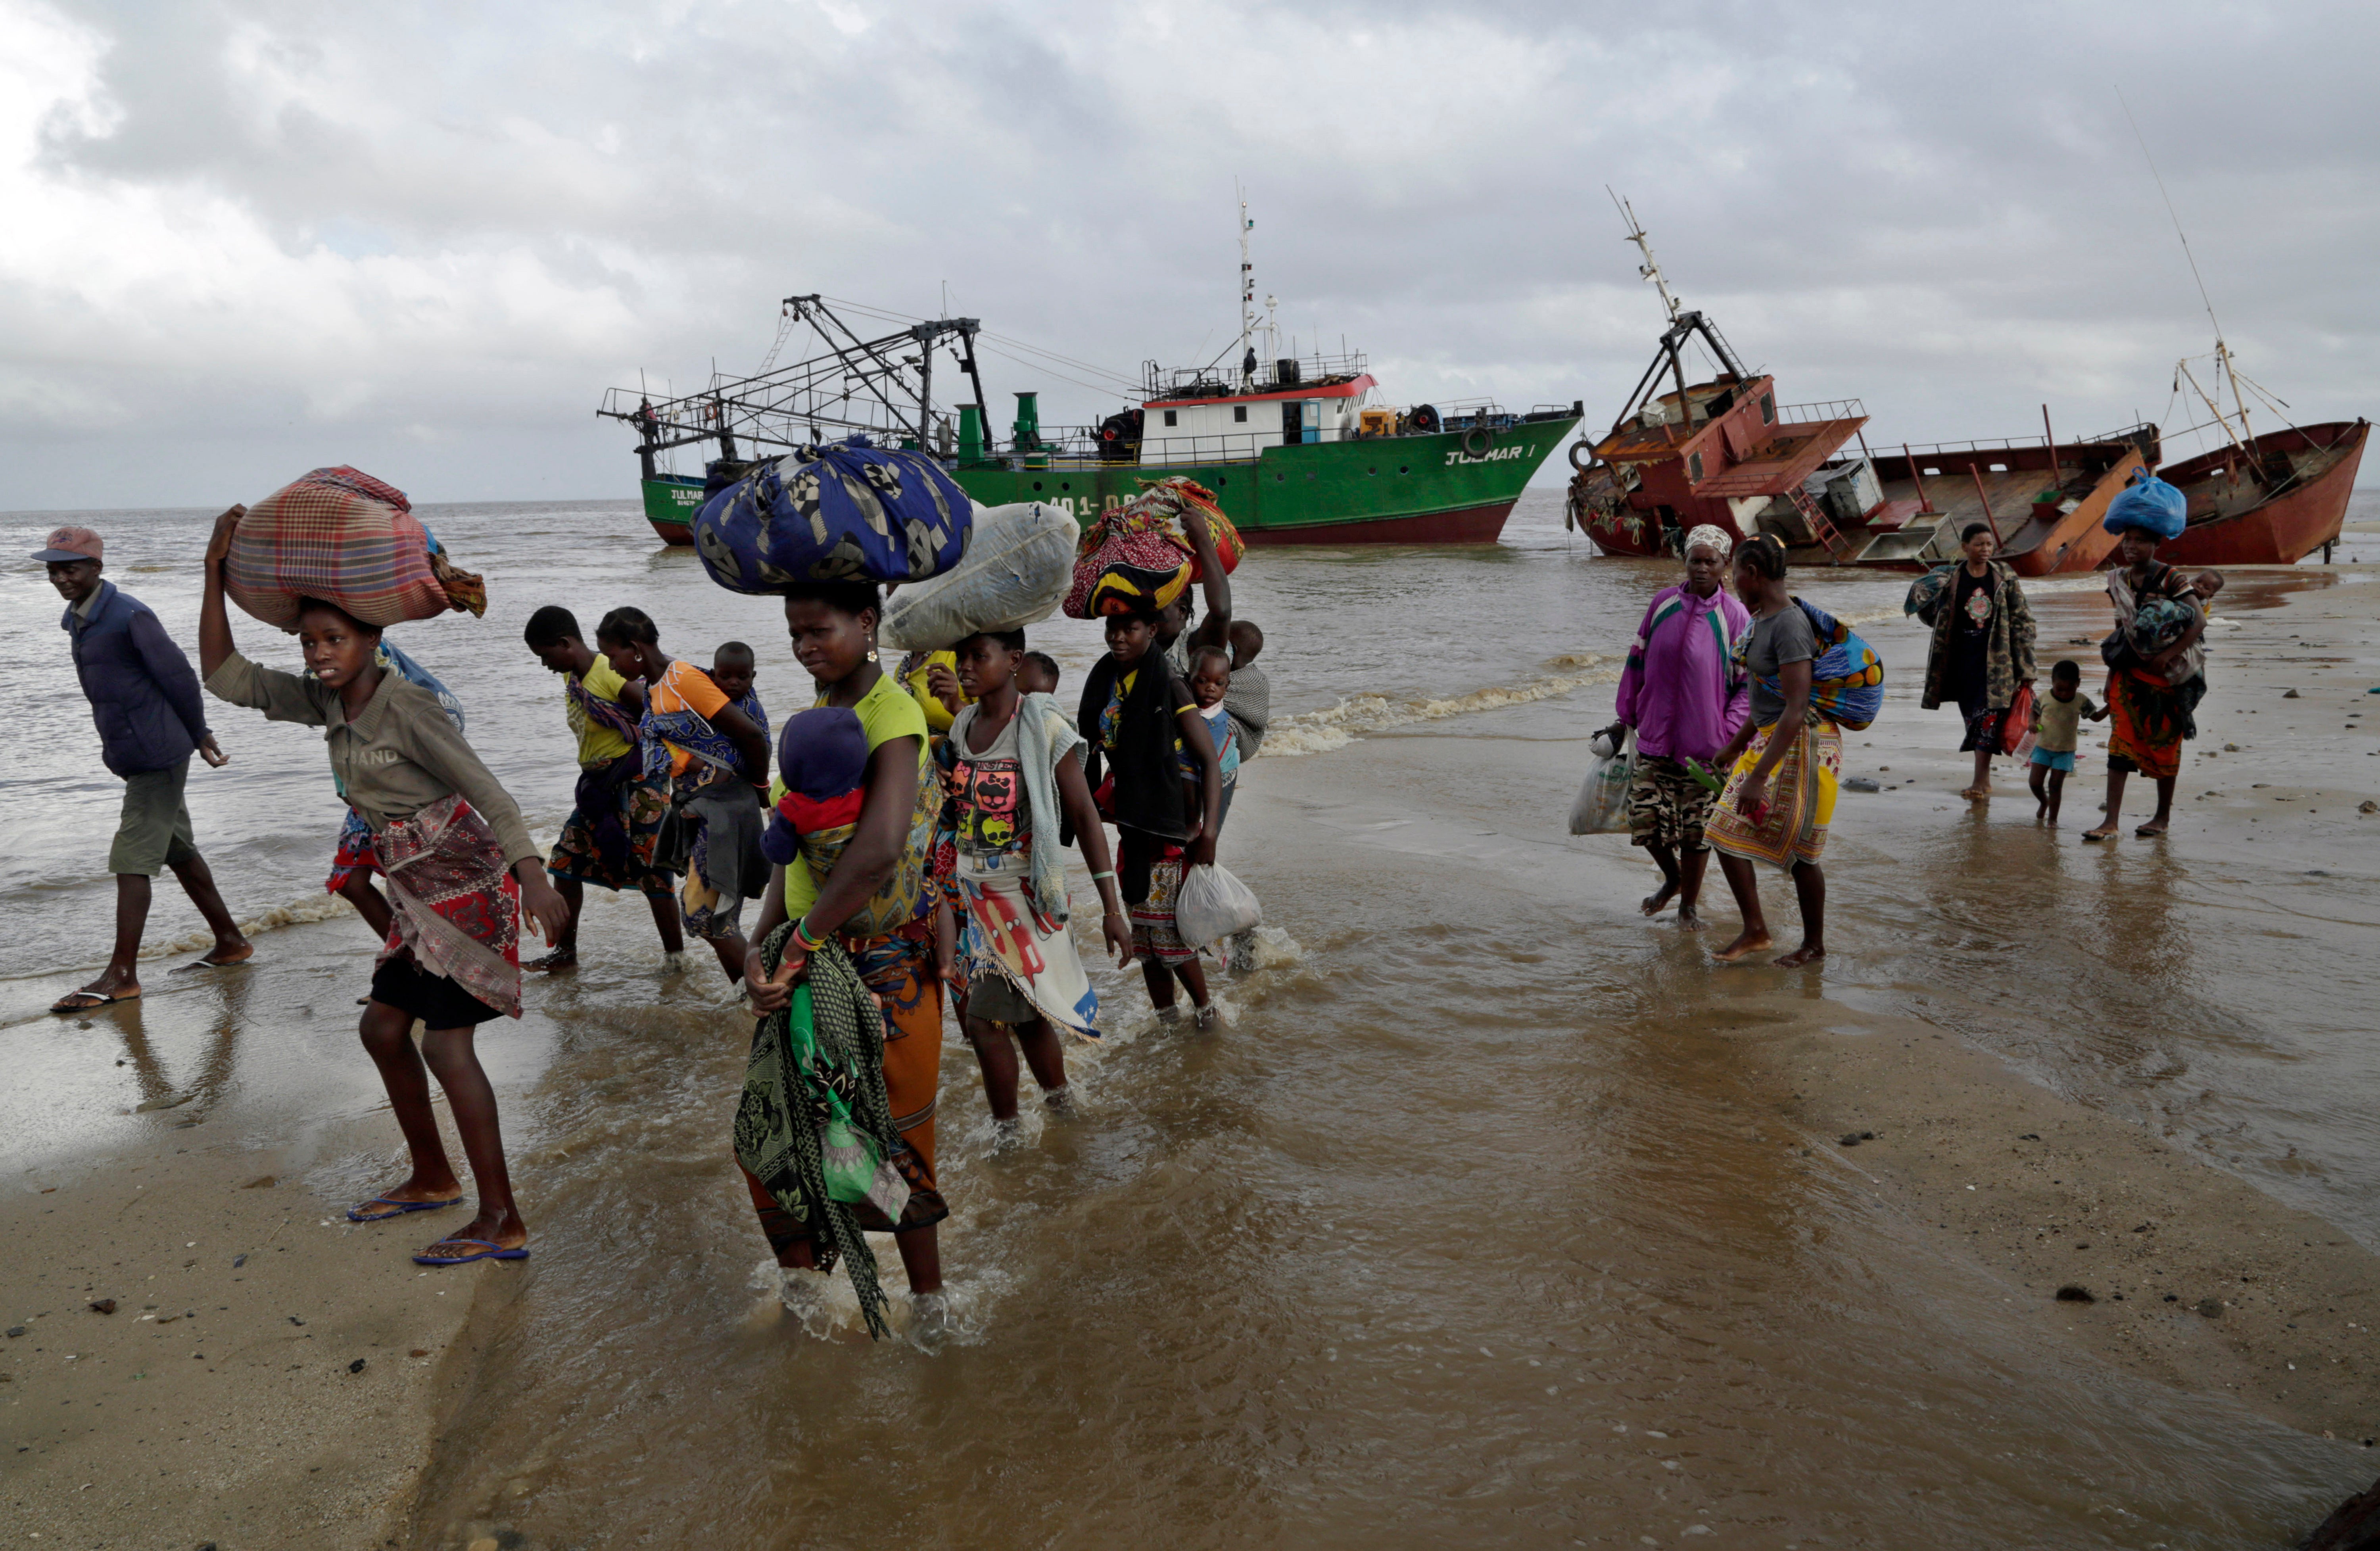 Displaced families arrive after being rescued by boat from a flooded area of Buzi district, 200 kilometers (120 miles) outside Beira, Mozambique